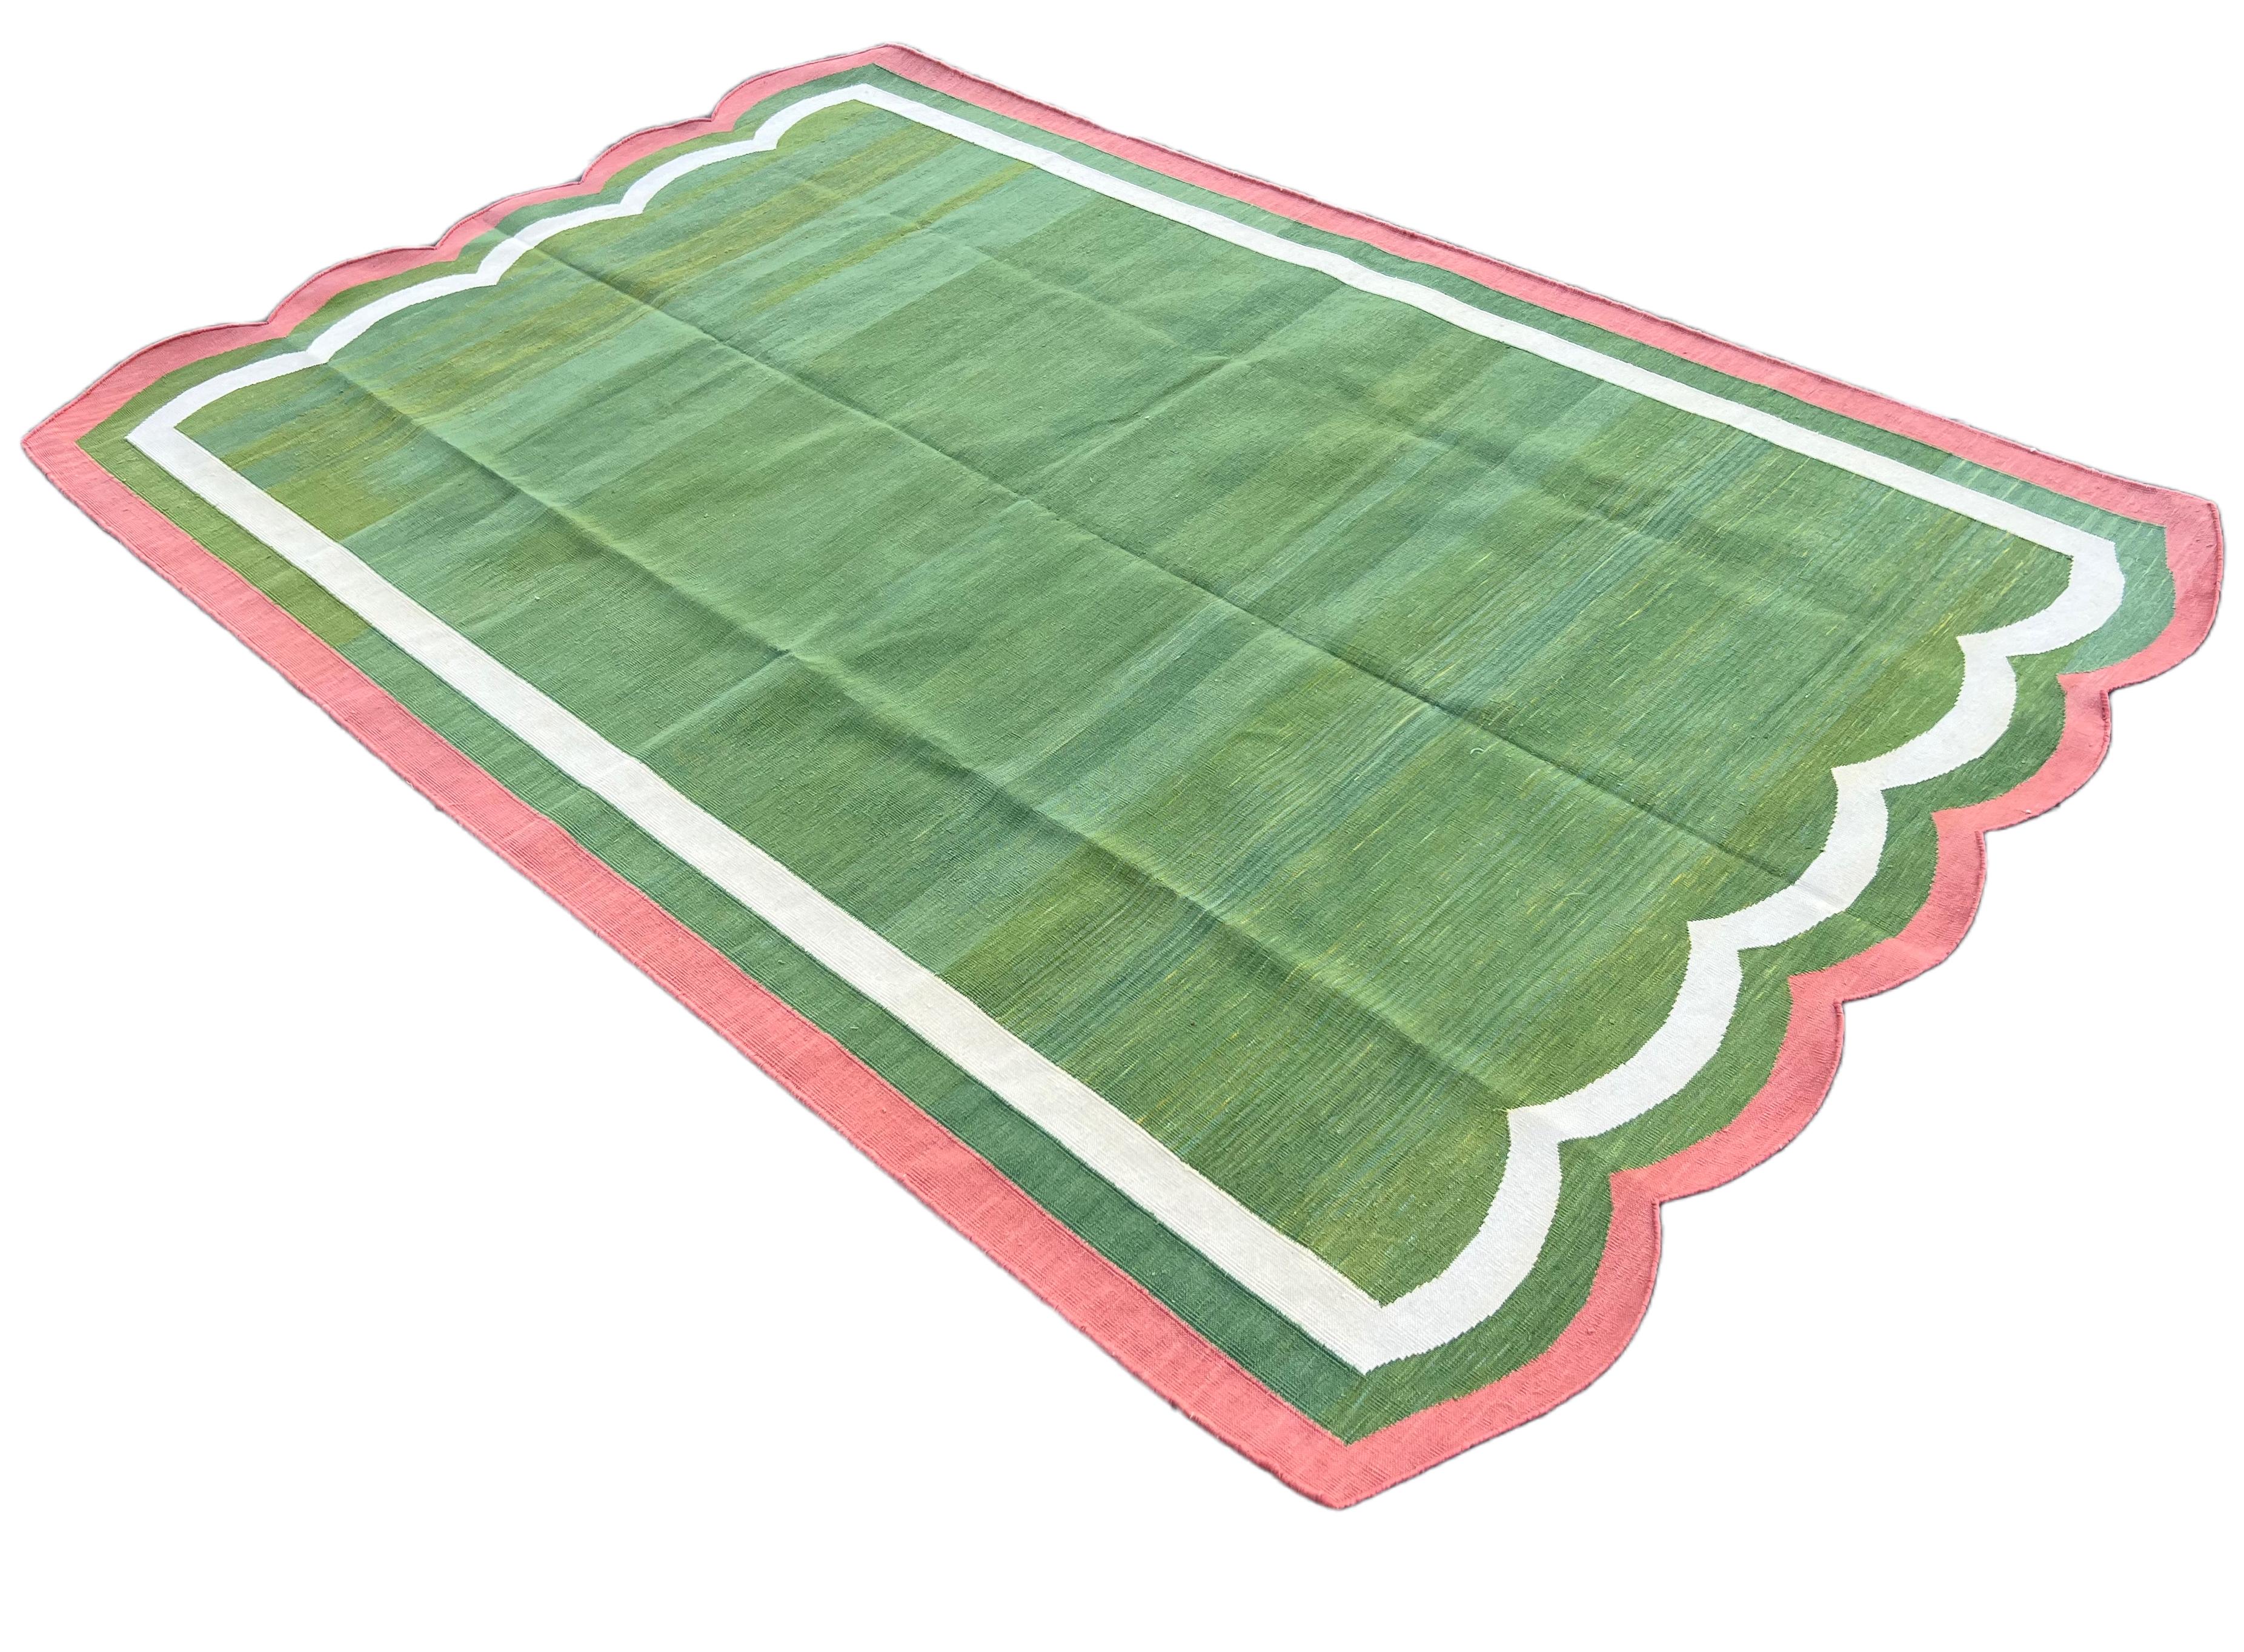 Cotton Vegetable Dyed Forest Green, Cream And Rose Pink Two Sided Scalloped Rug-5'x8' 
(Scallops runs on 5 Feet Sides)
These special flat-weave dhurries are hand-woven with 15 ply 100% cotton yarn. Due to the special manufacturing techniques used to